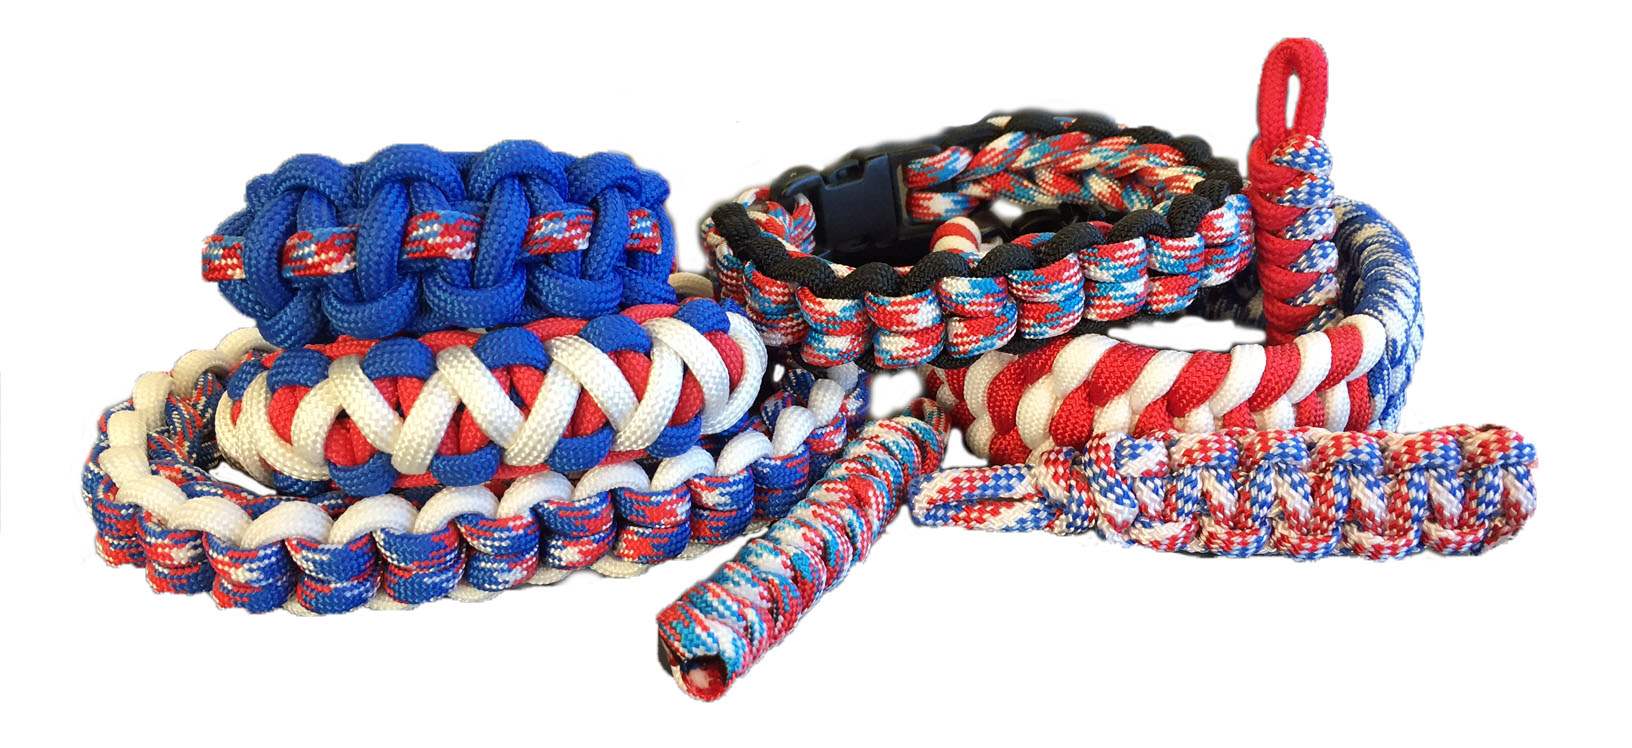 Patriotic Paracord Projects